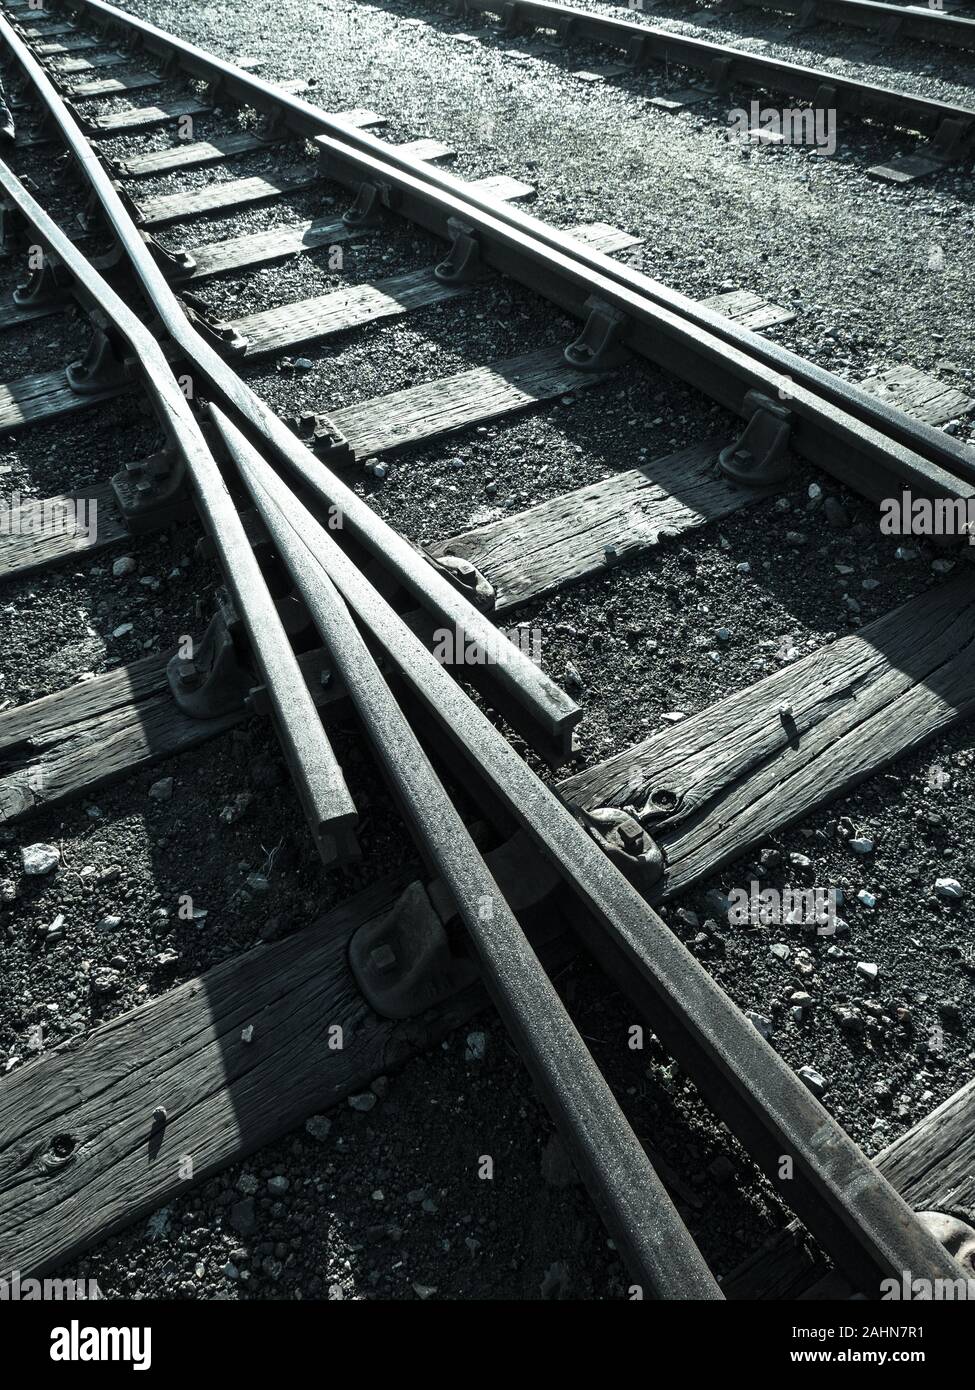 Black and White Abstract Landscape of Railway Tracks, Didcot Railway Centre, Didcote, Oxfordshire, England, UK, GB. Stock Photo